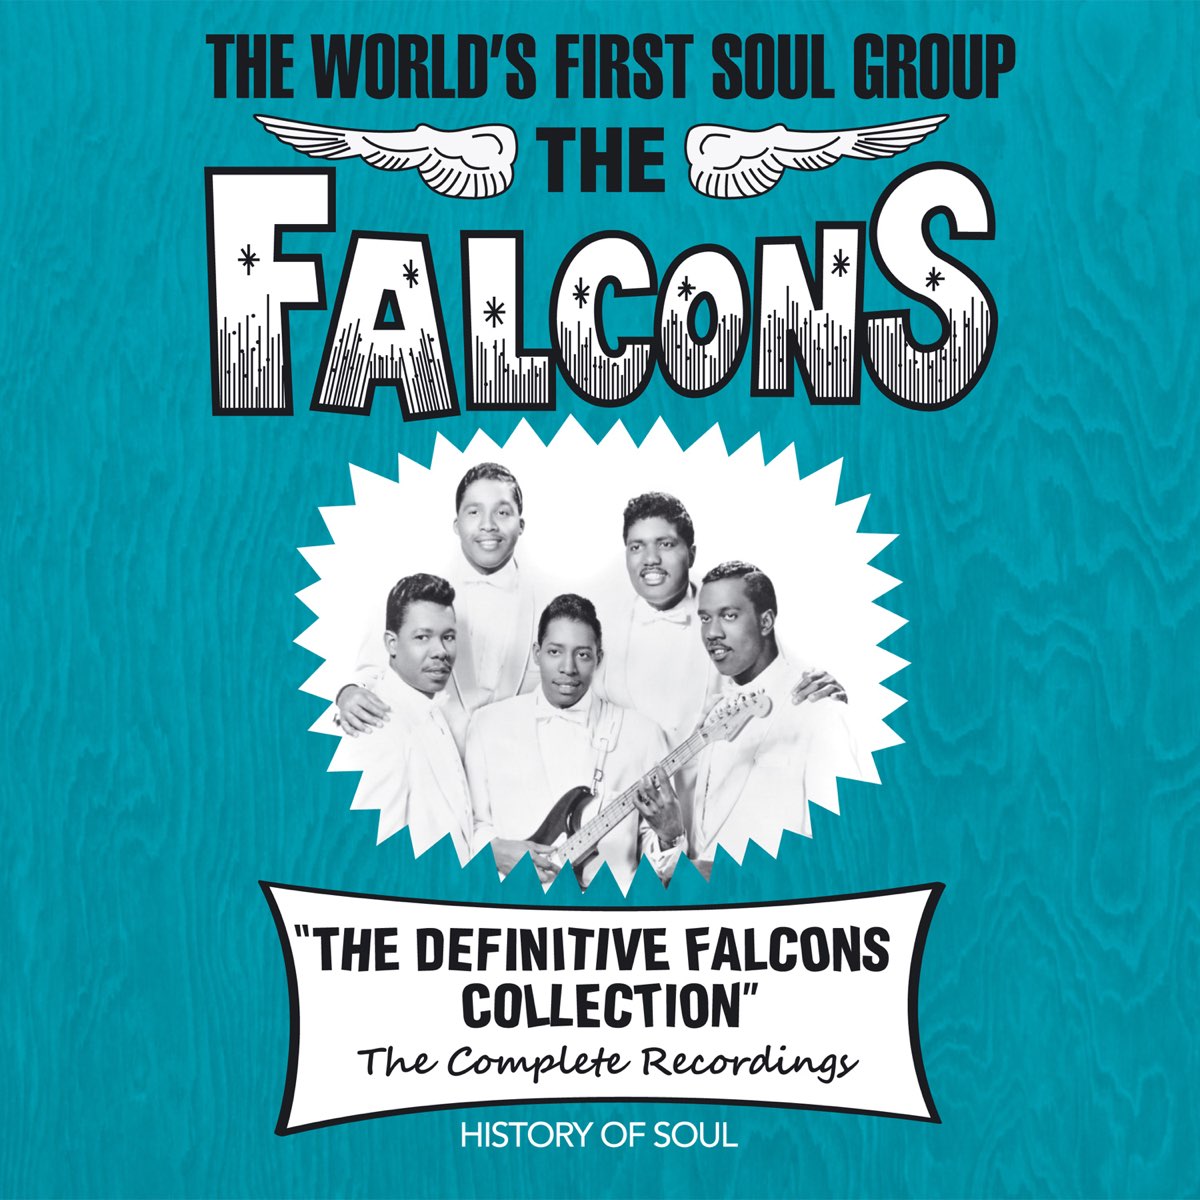 Soul история. Band of the Falcon. Recording an album. The Falcons Band 1961. You're so Fine (the Falcons Song).